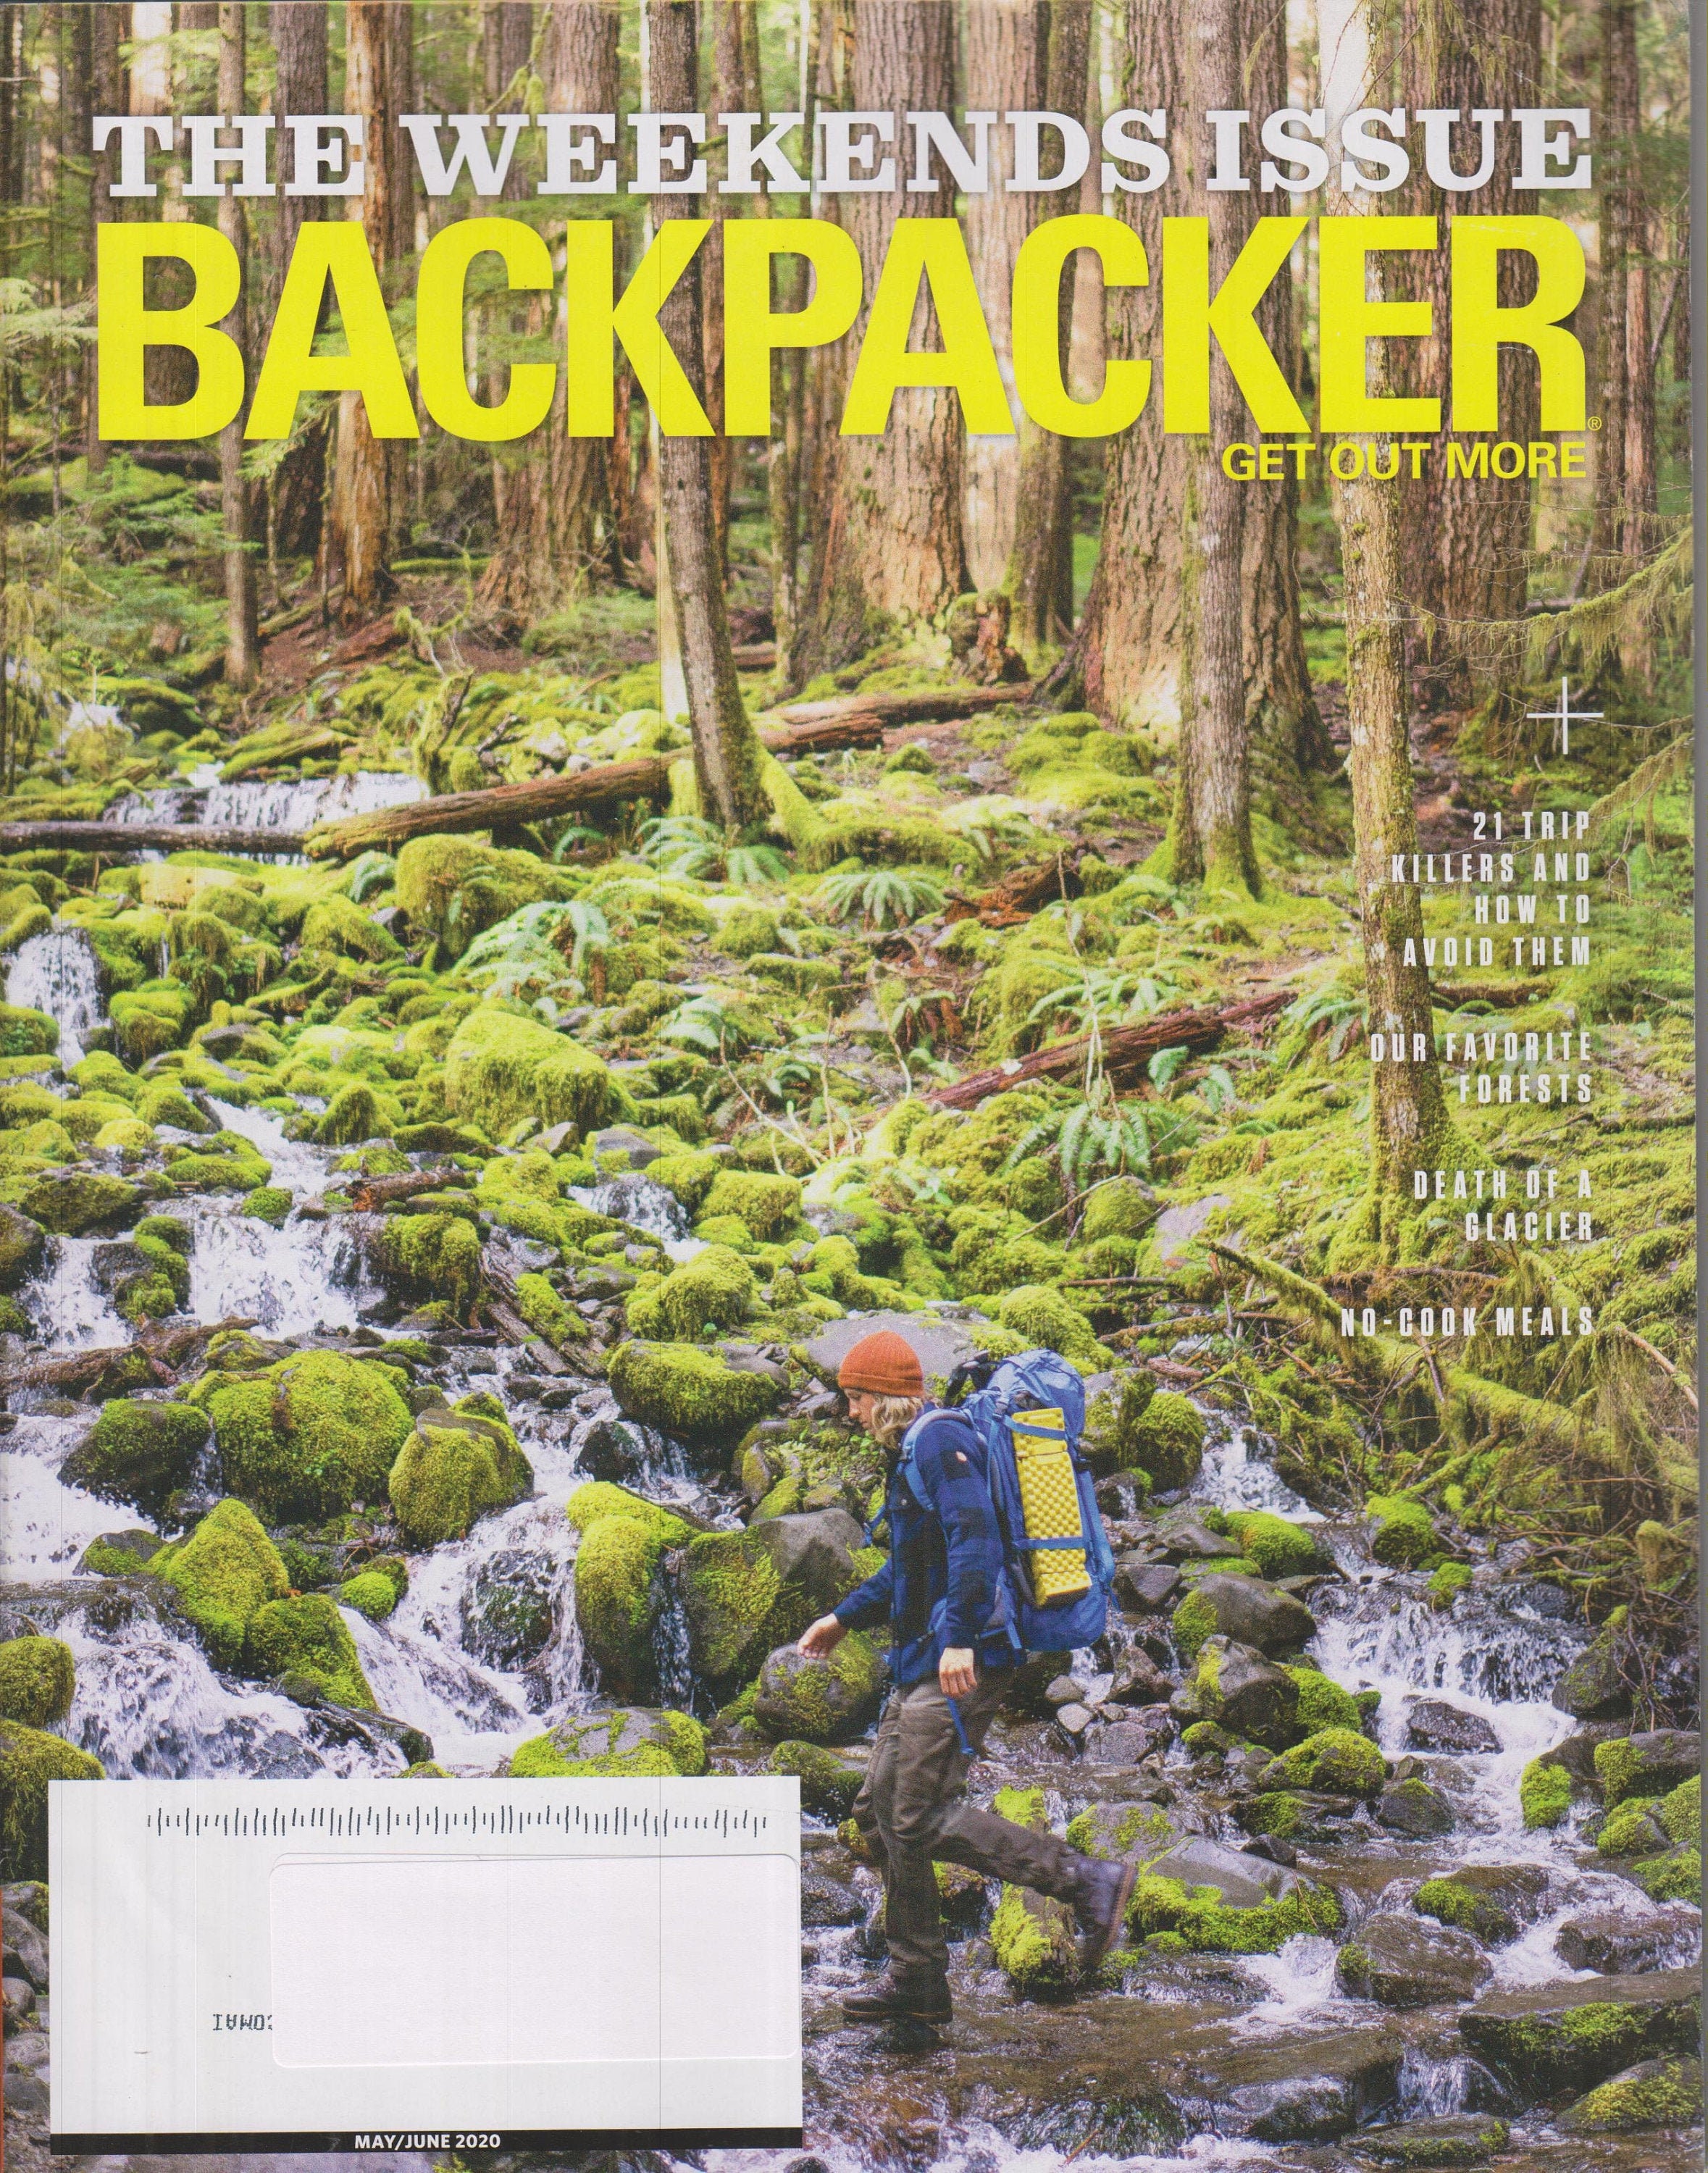 Backpacker May June 2020 The Weekends Issue Magazine Outdoor